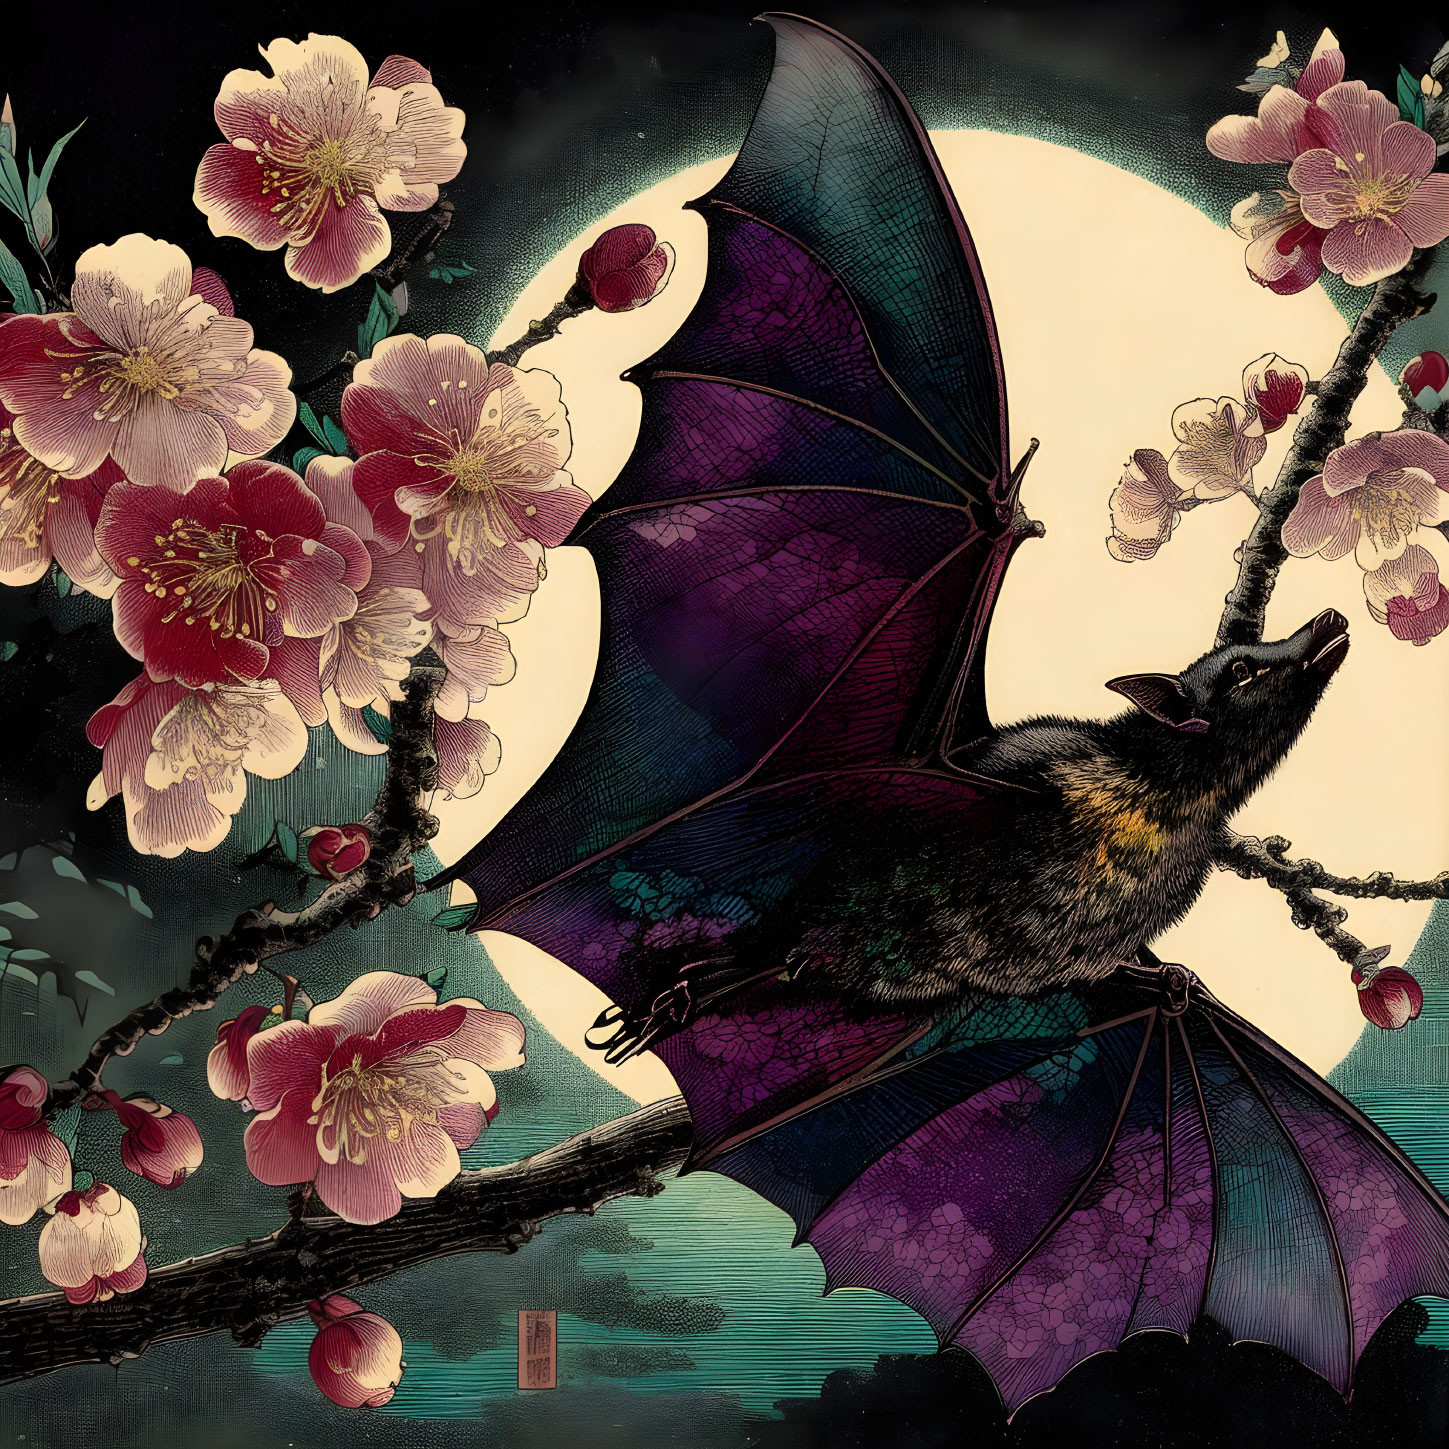 a bat flits in moonlight above the plum blossoms